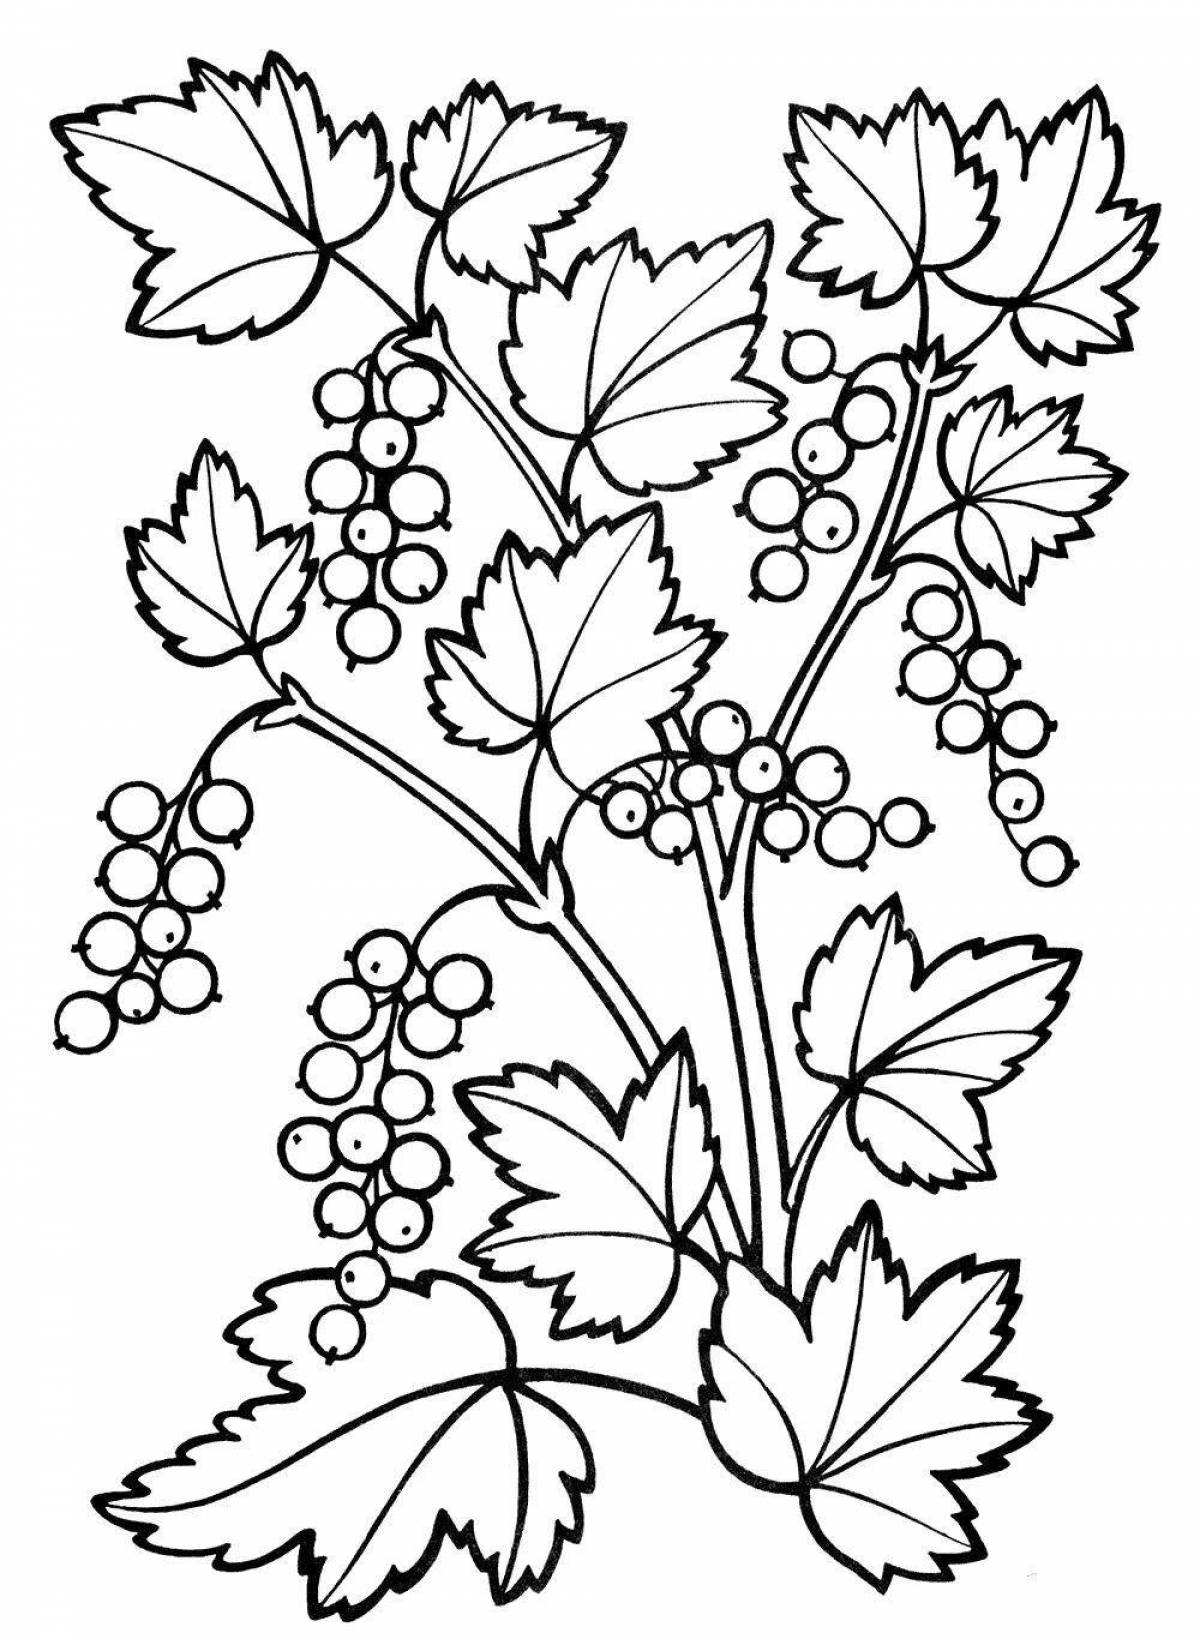 Currant fun coloring book for kids